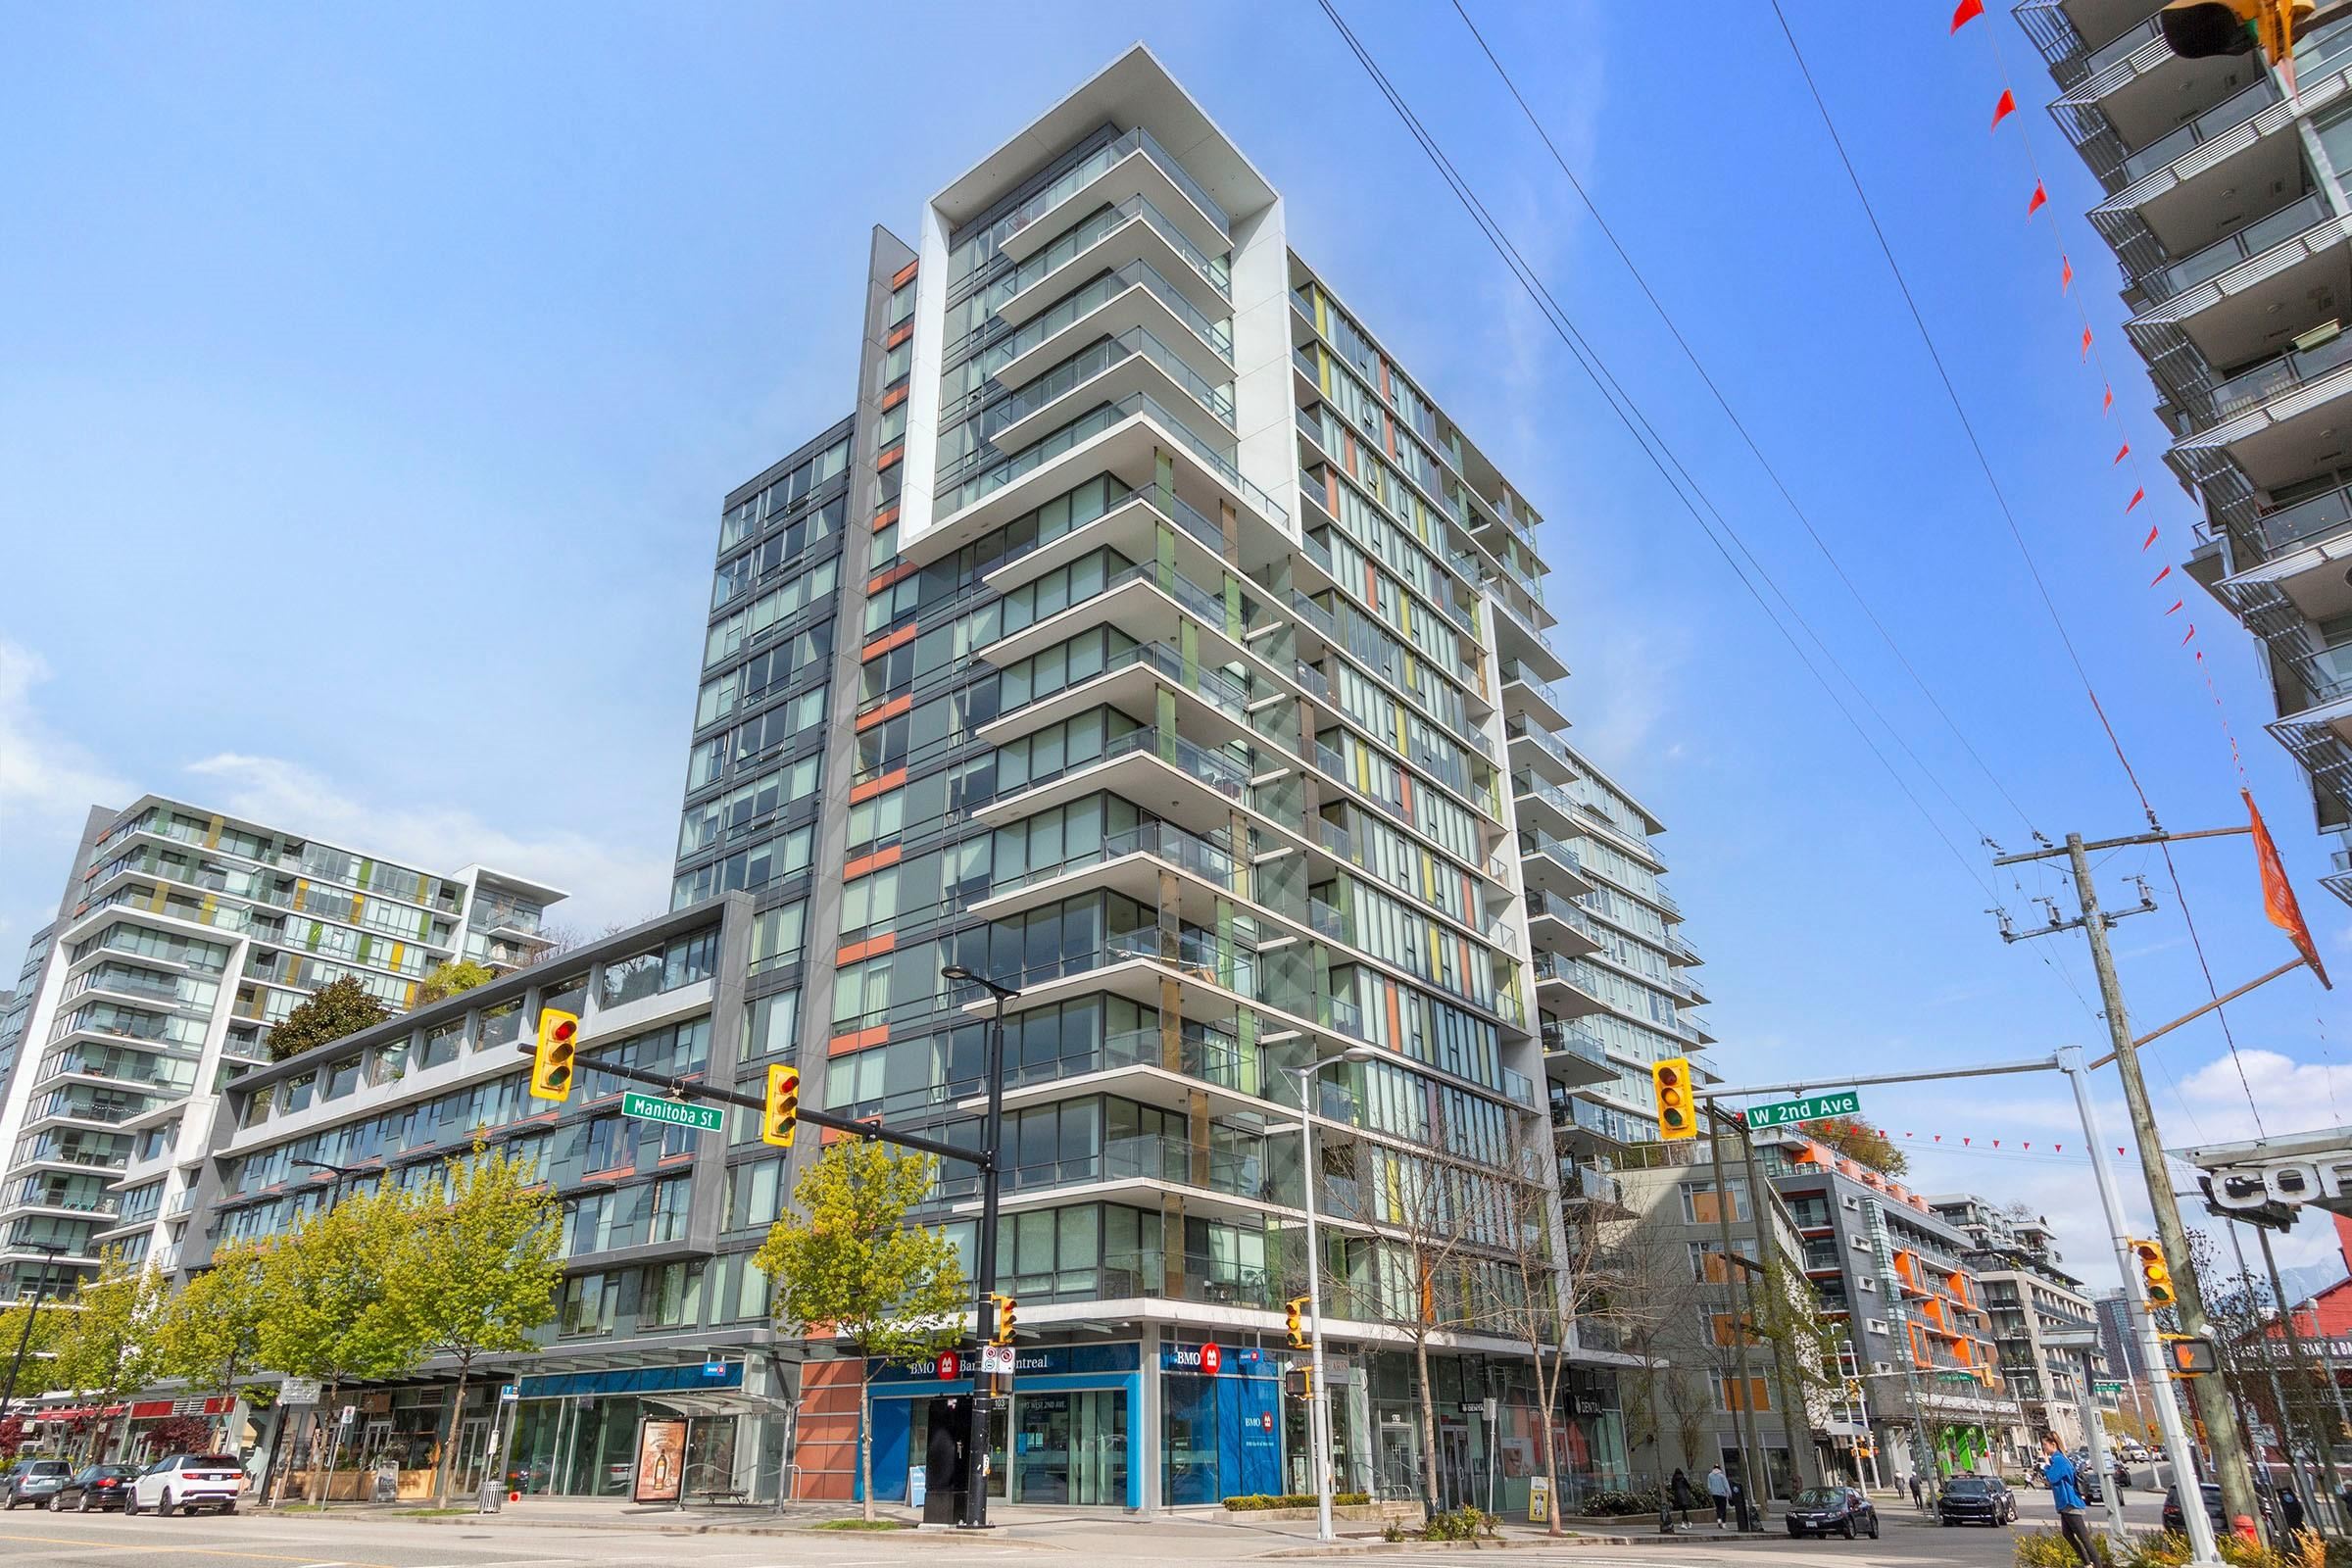 False Creek Apartment/Condo for sale:  2 bedroom 1,038 sq.ft. (Listed 2106-02-06)